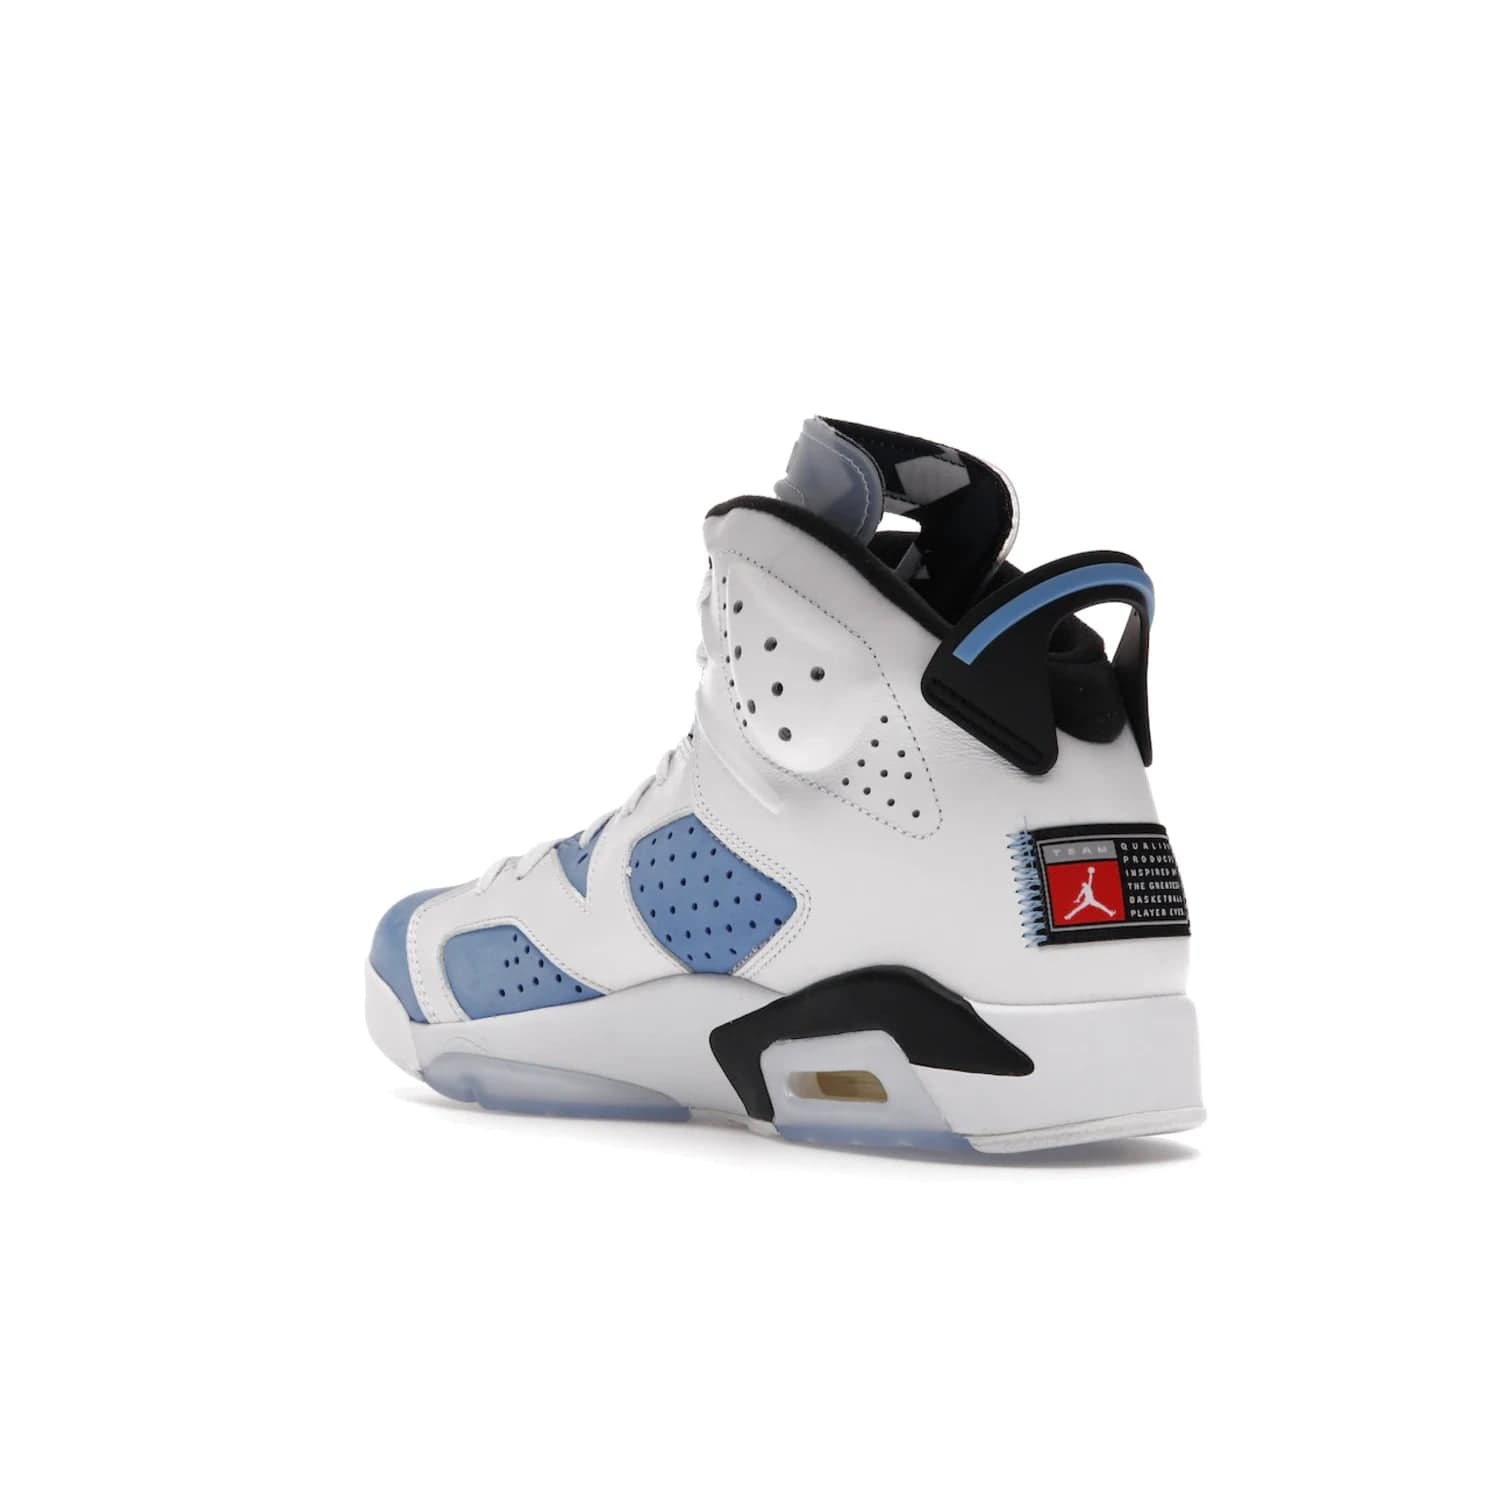 Jordan 6 Retro UNC White - Image 24 - Only at www.BallersClubKickz.com - Air Jordan 6 Retro UNC White with classic UNC colors brings nostalgia and style to a legendary silhouette. Celebrate MJ's alma mater with navy blue accents, icy semi-translucent sole and Jordan Team patch. Out March 2022 for the Sneaker Enthusiast.